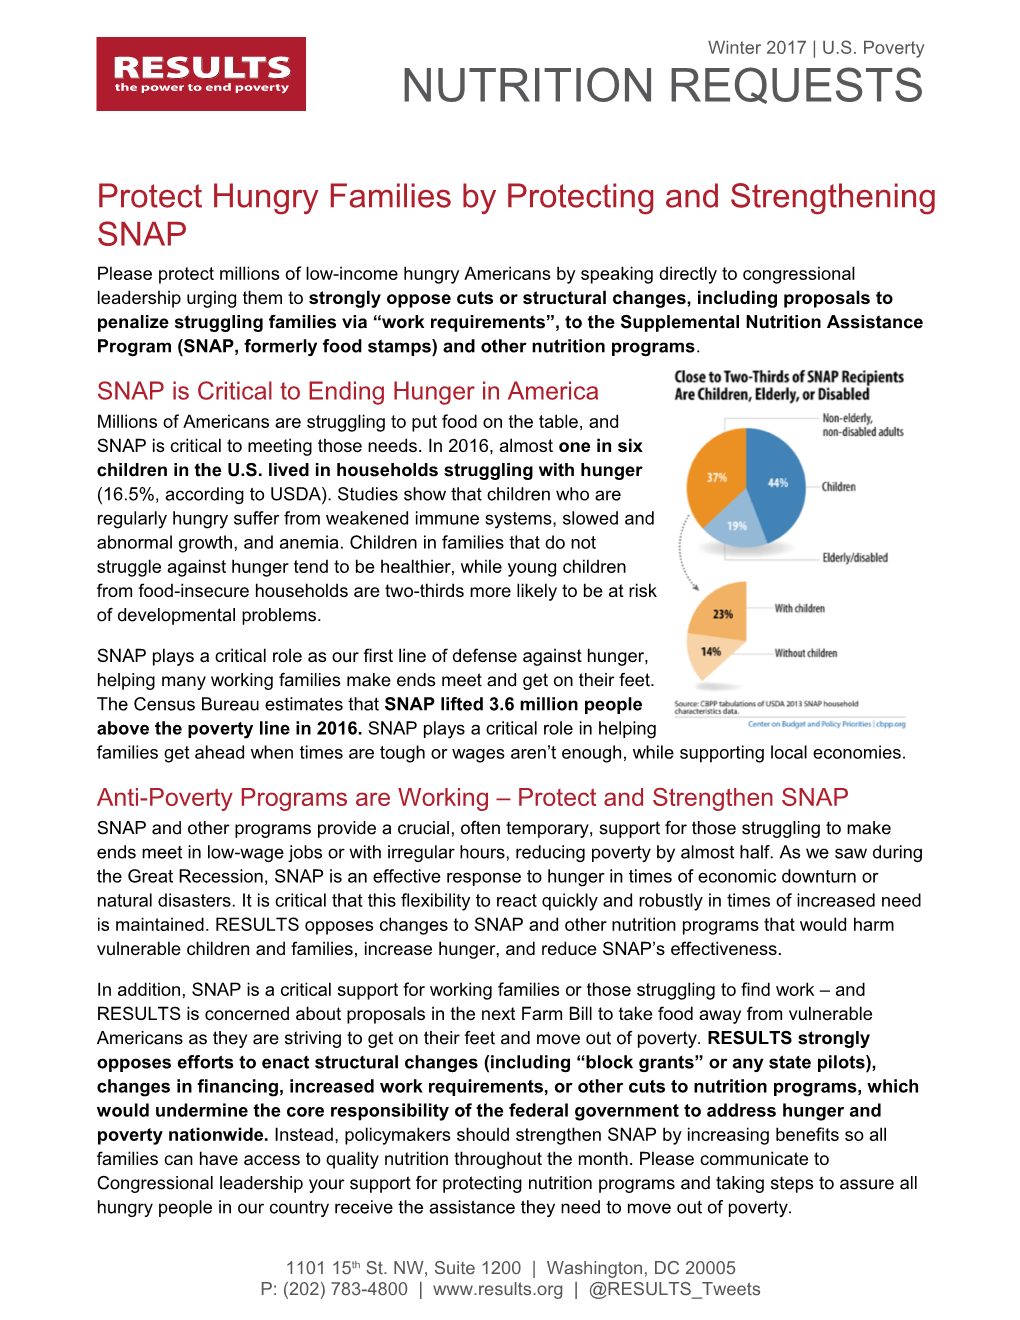 Protect Hungry Families by Protecting and Strengthening SNAP